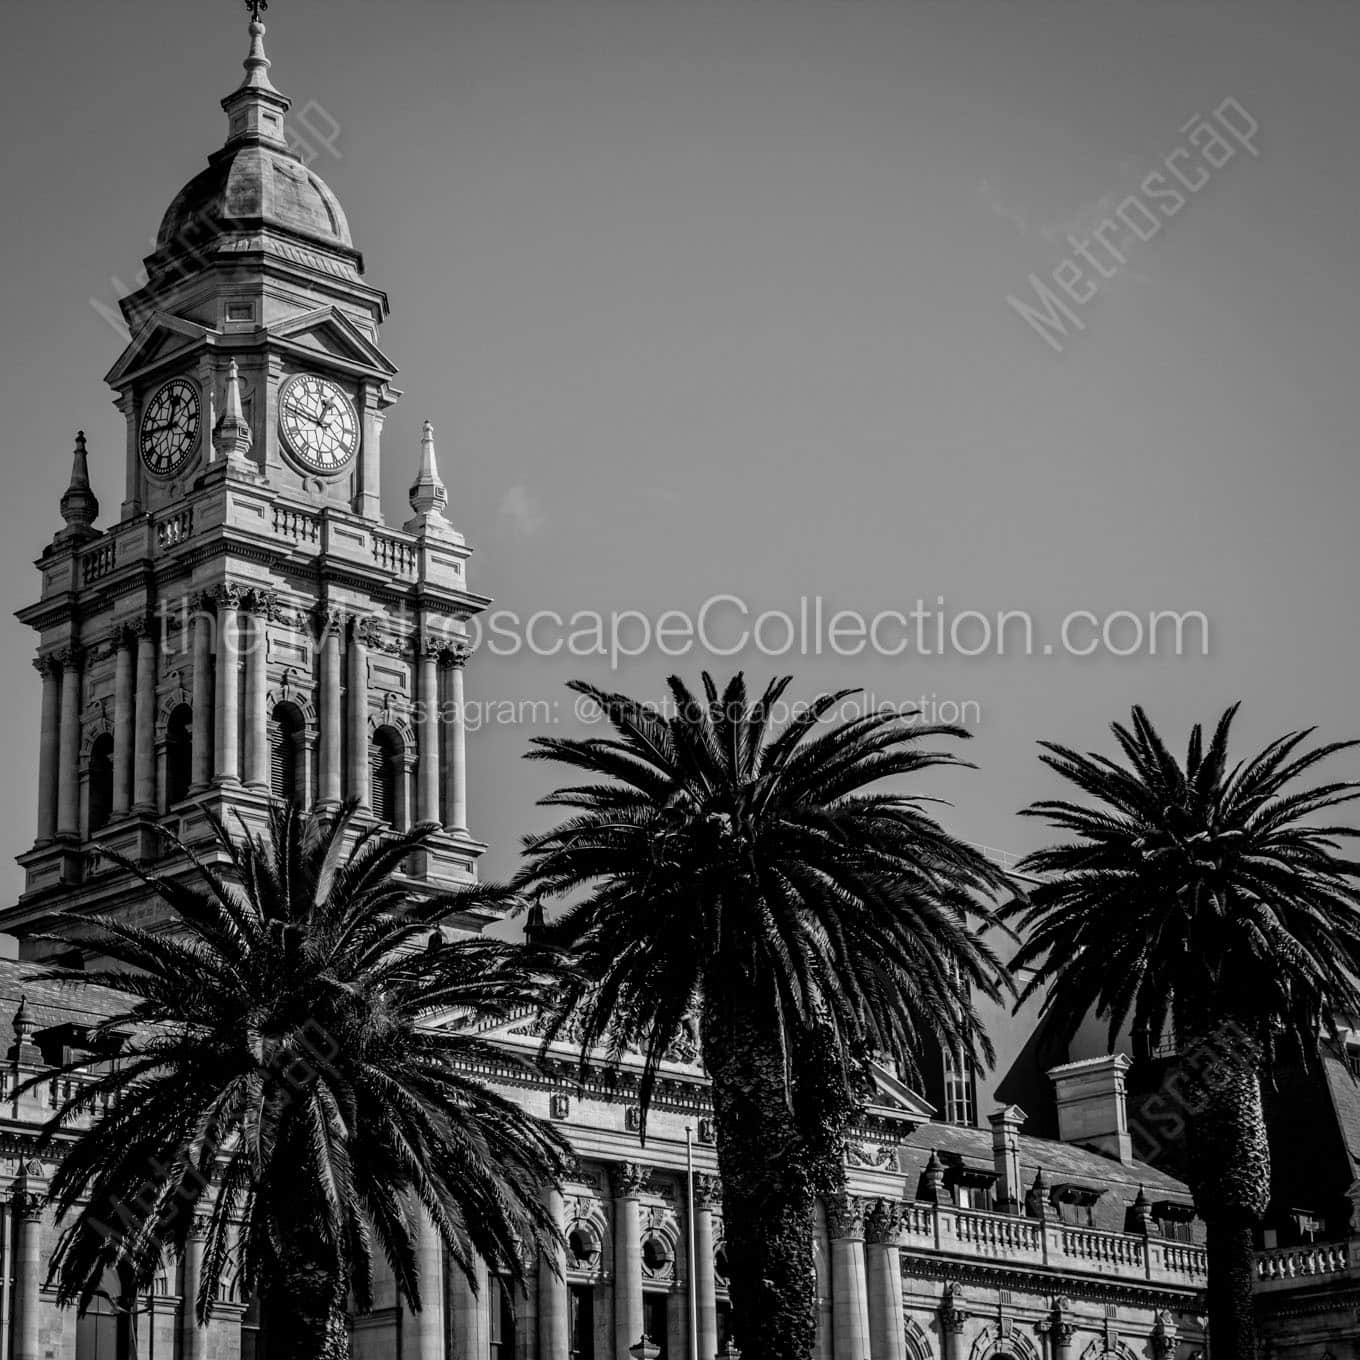 cape town city hall from grand parade plaza Black & White Office Art